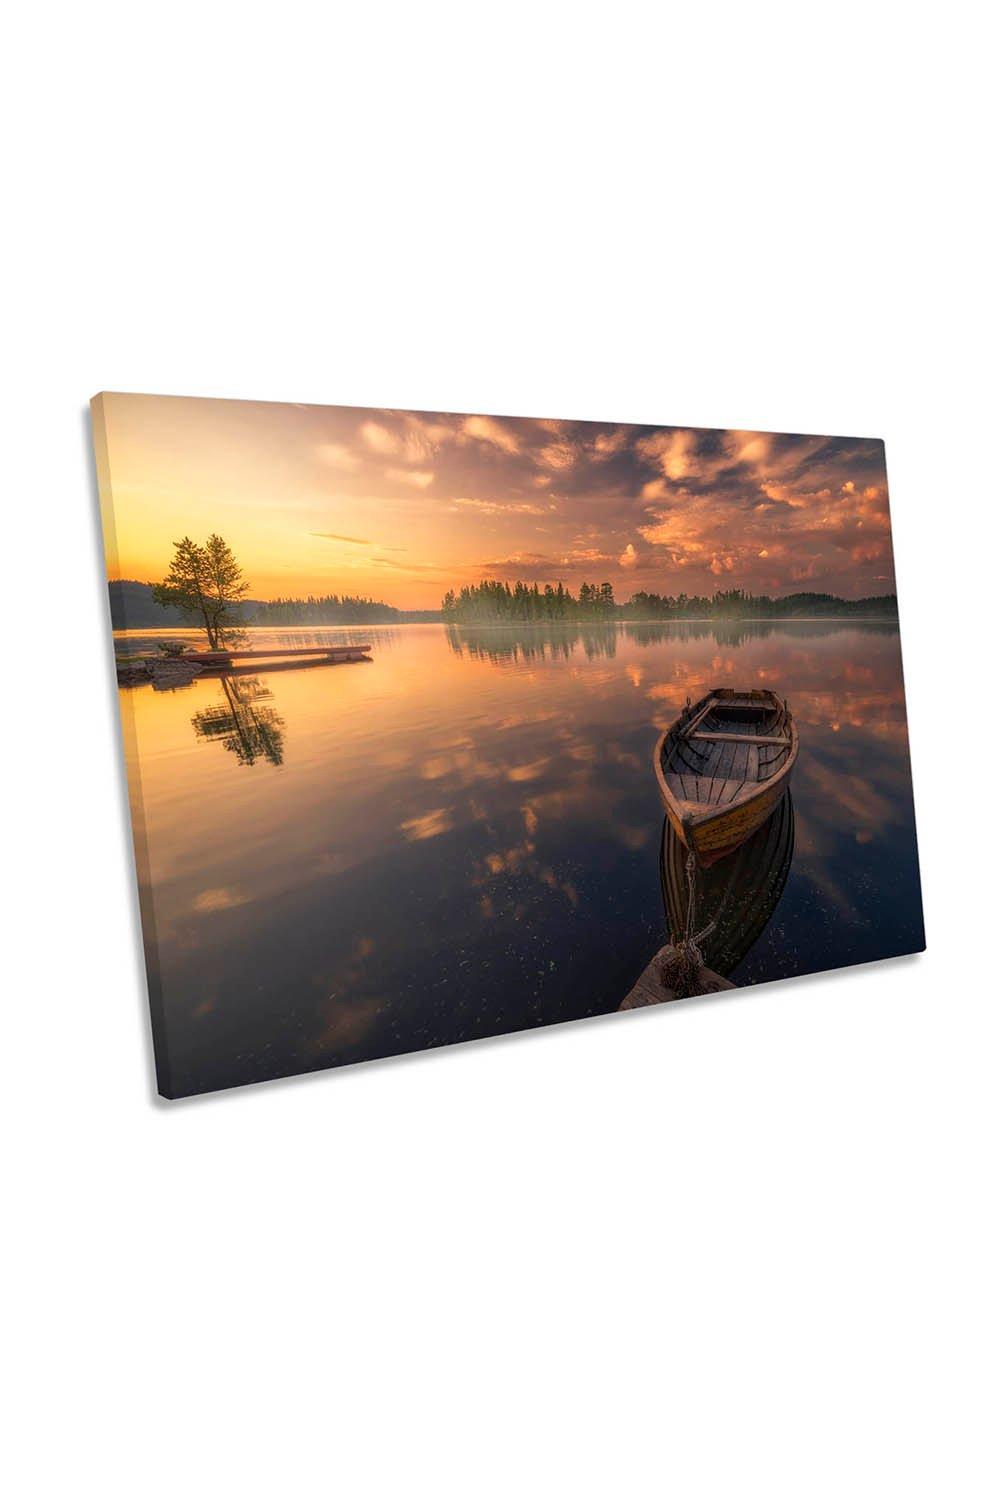 Wooden Boat Orange Sunset Lake Canvas Wall Art Picture Print